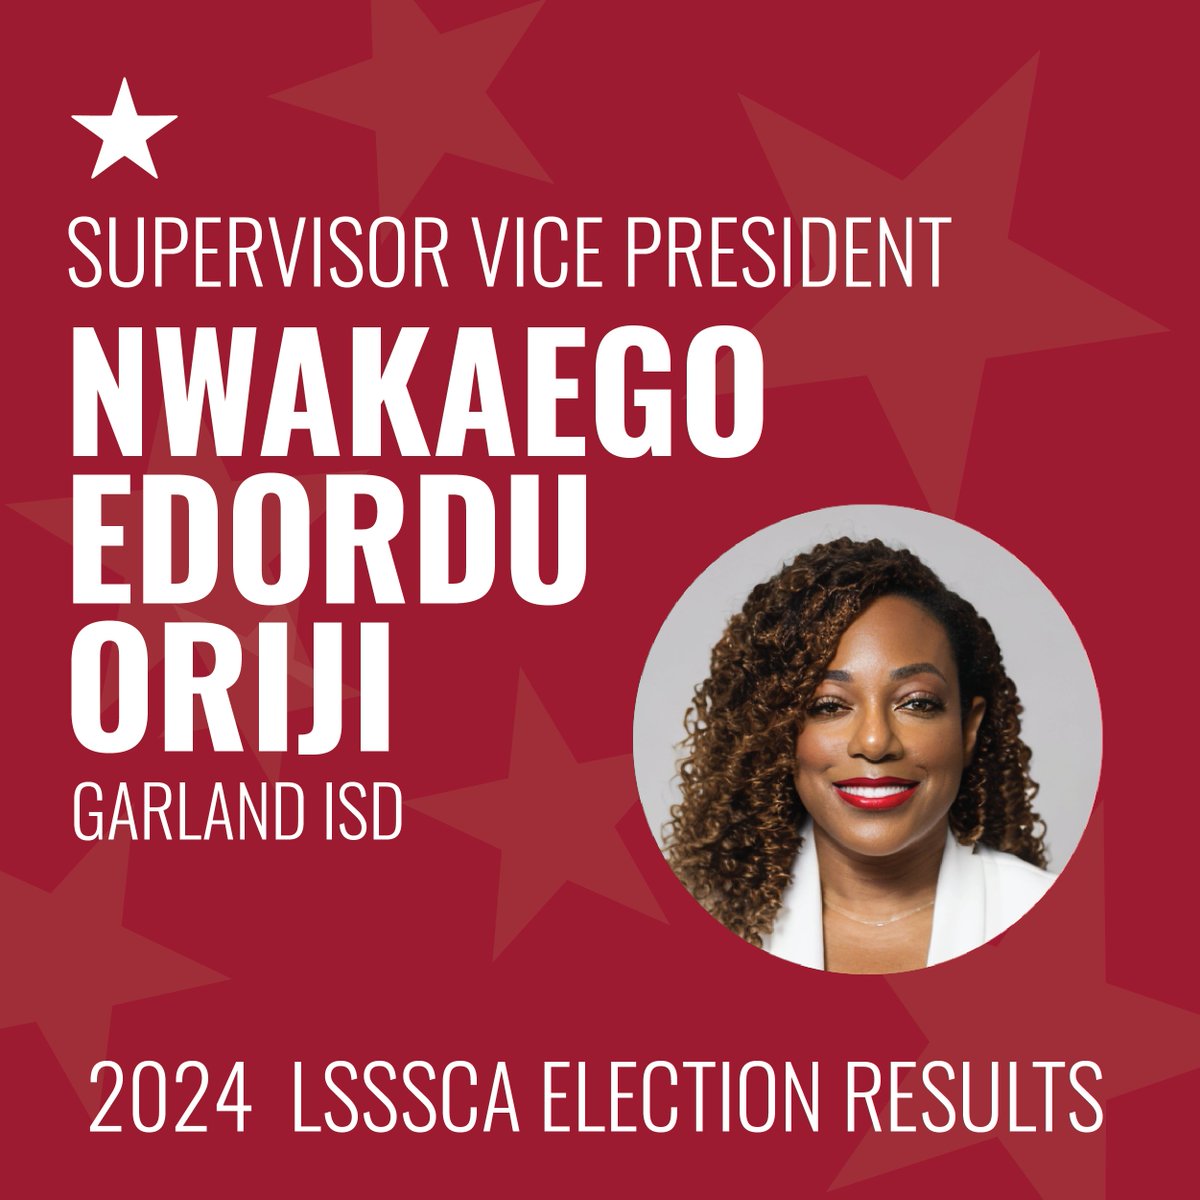 Election results are here! Meet our new Supervisor Vice President Nwakaego Edordu Oriji! Congratulations! We look forward to your leadership in serving school counselors across the Great State of Texas! 🎉